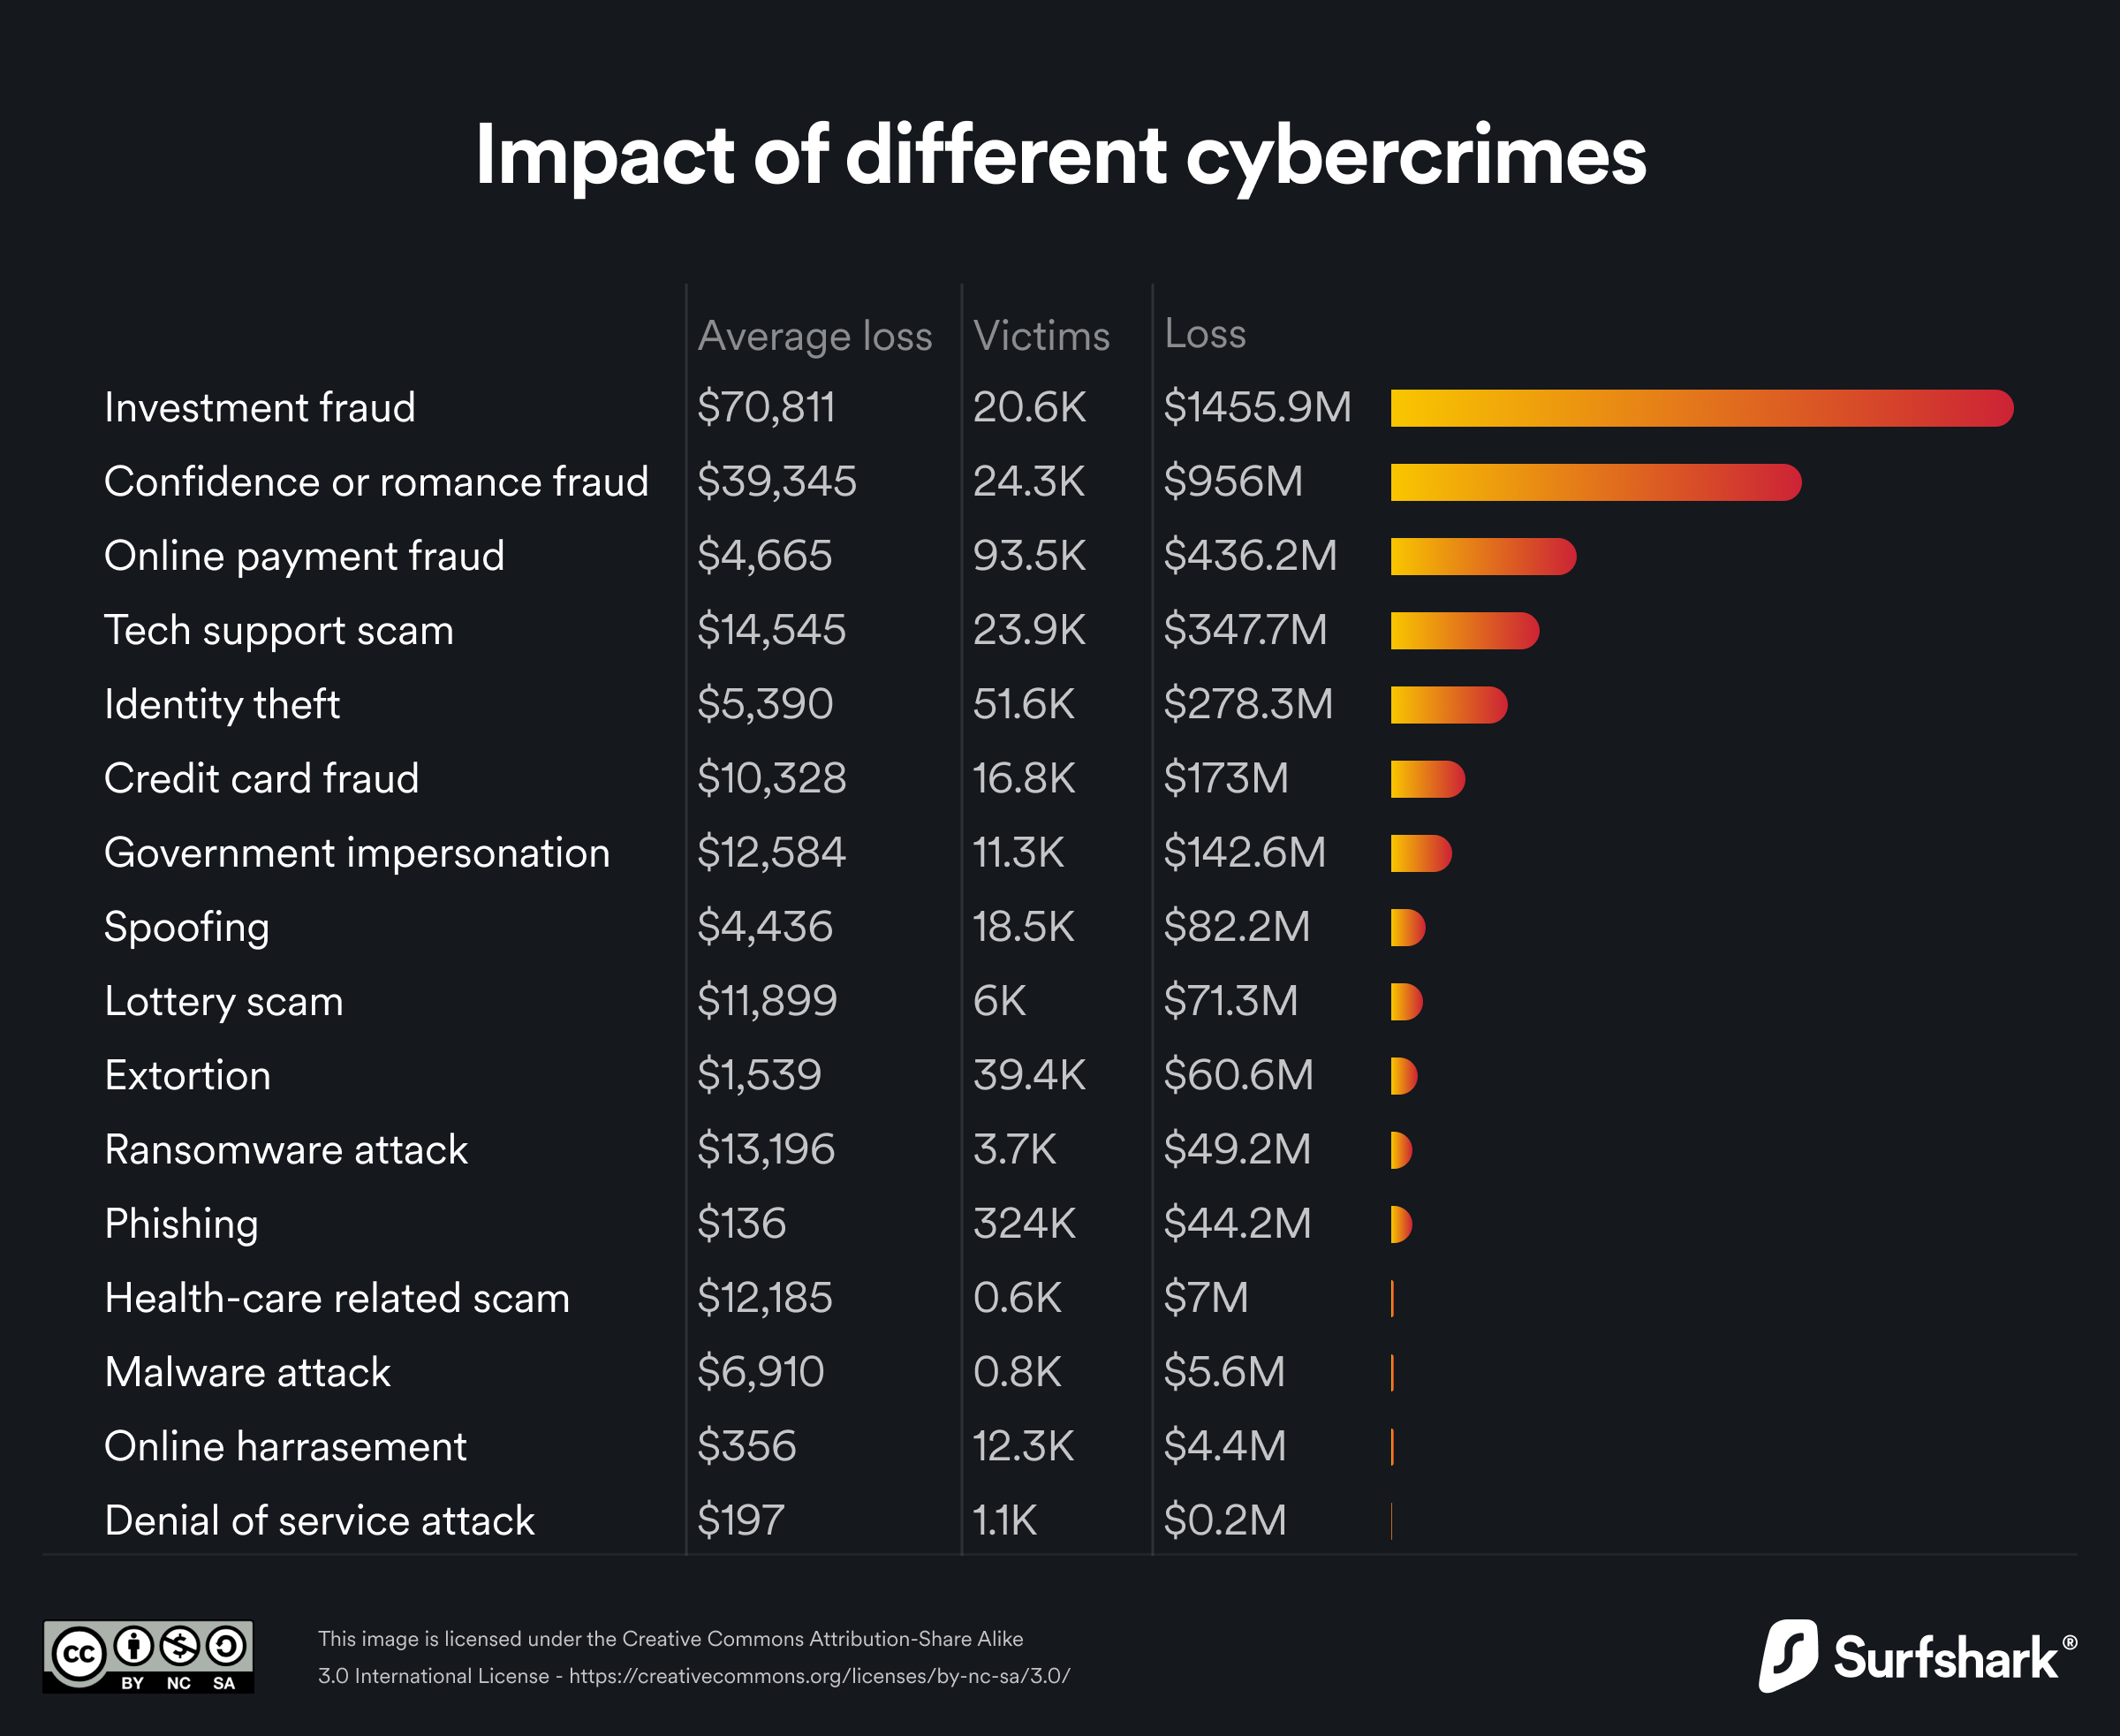 Impact of different cybercrimes